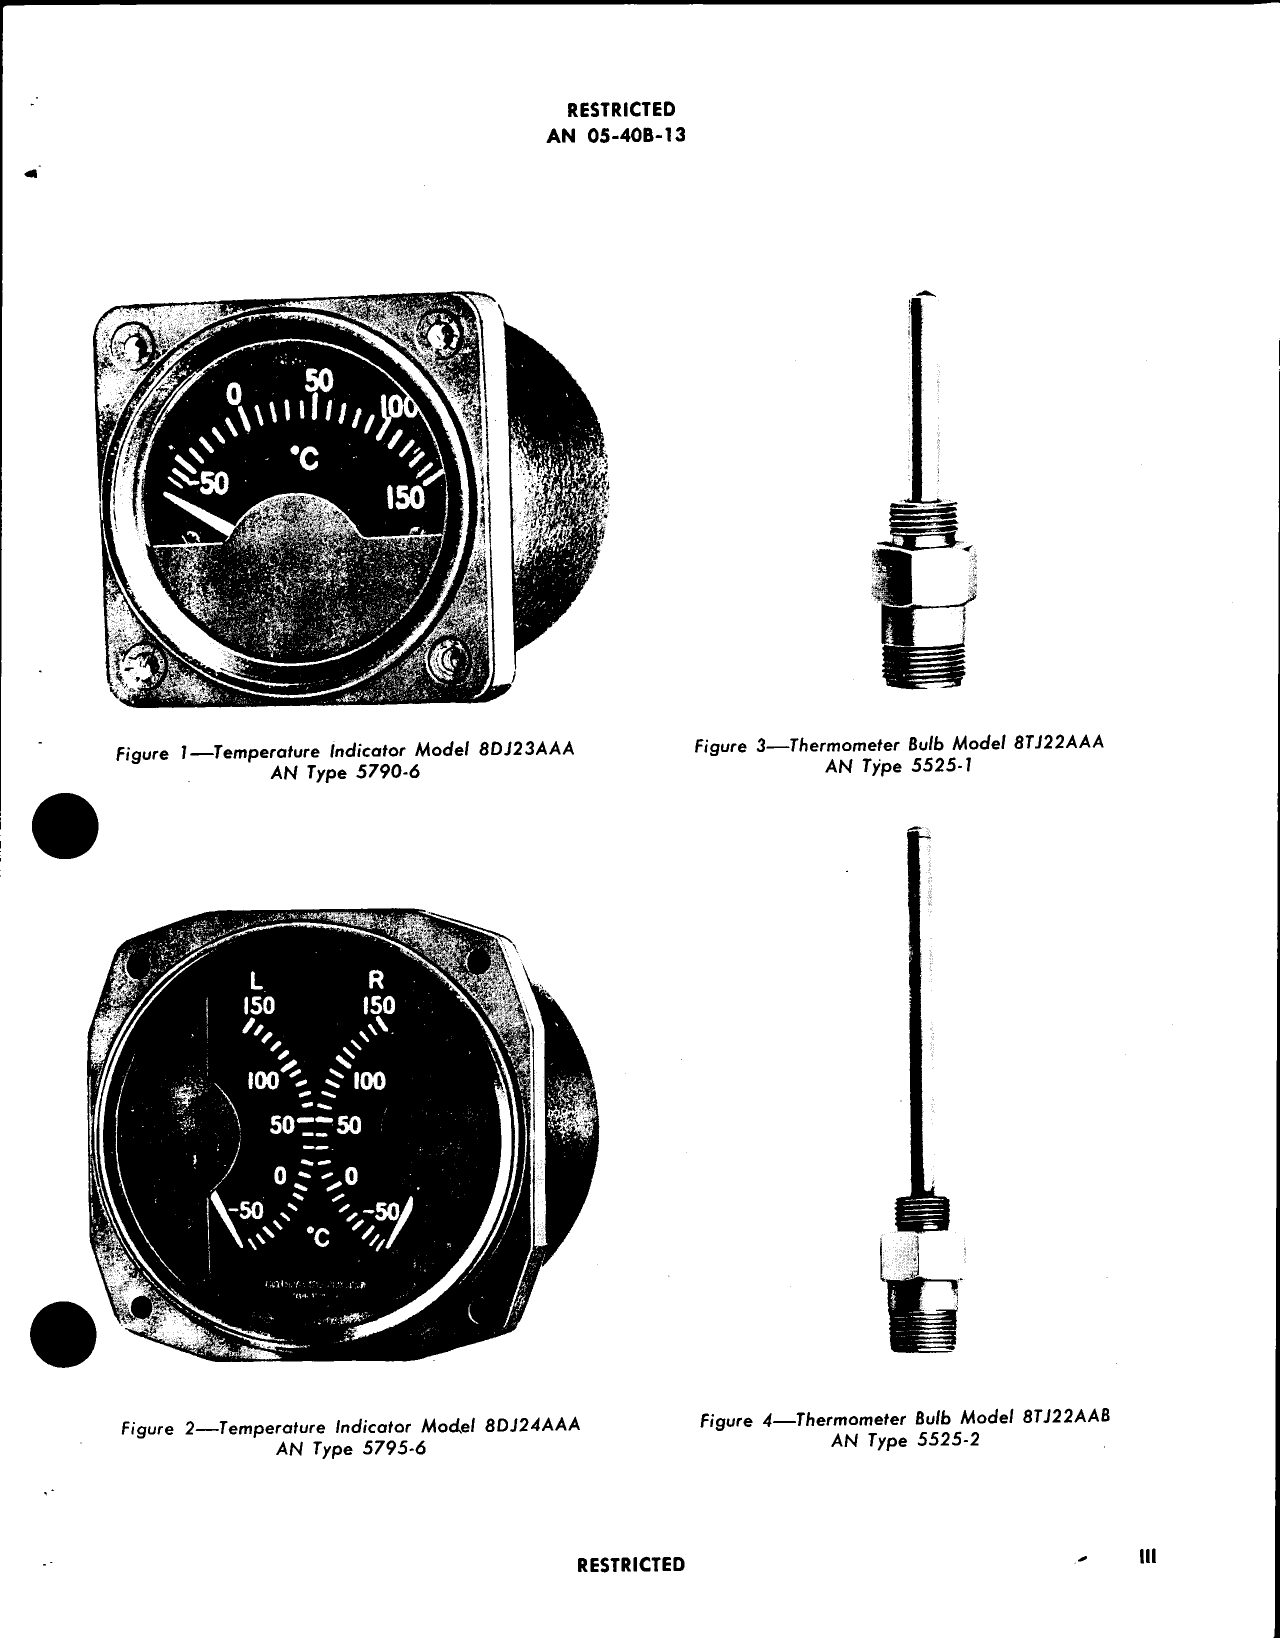 Sample page 5 from AirCorps Library document: Instal, Oper, Serv, & Ovh Inst with PC for Thermometer Indicator and Bulbs